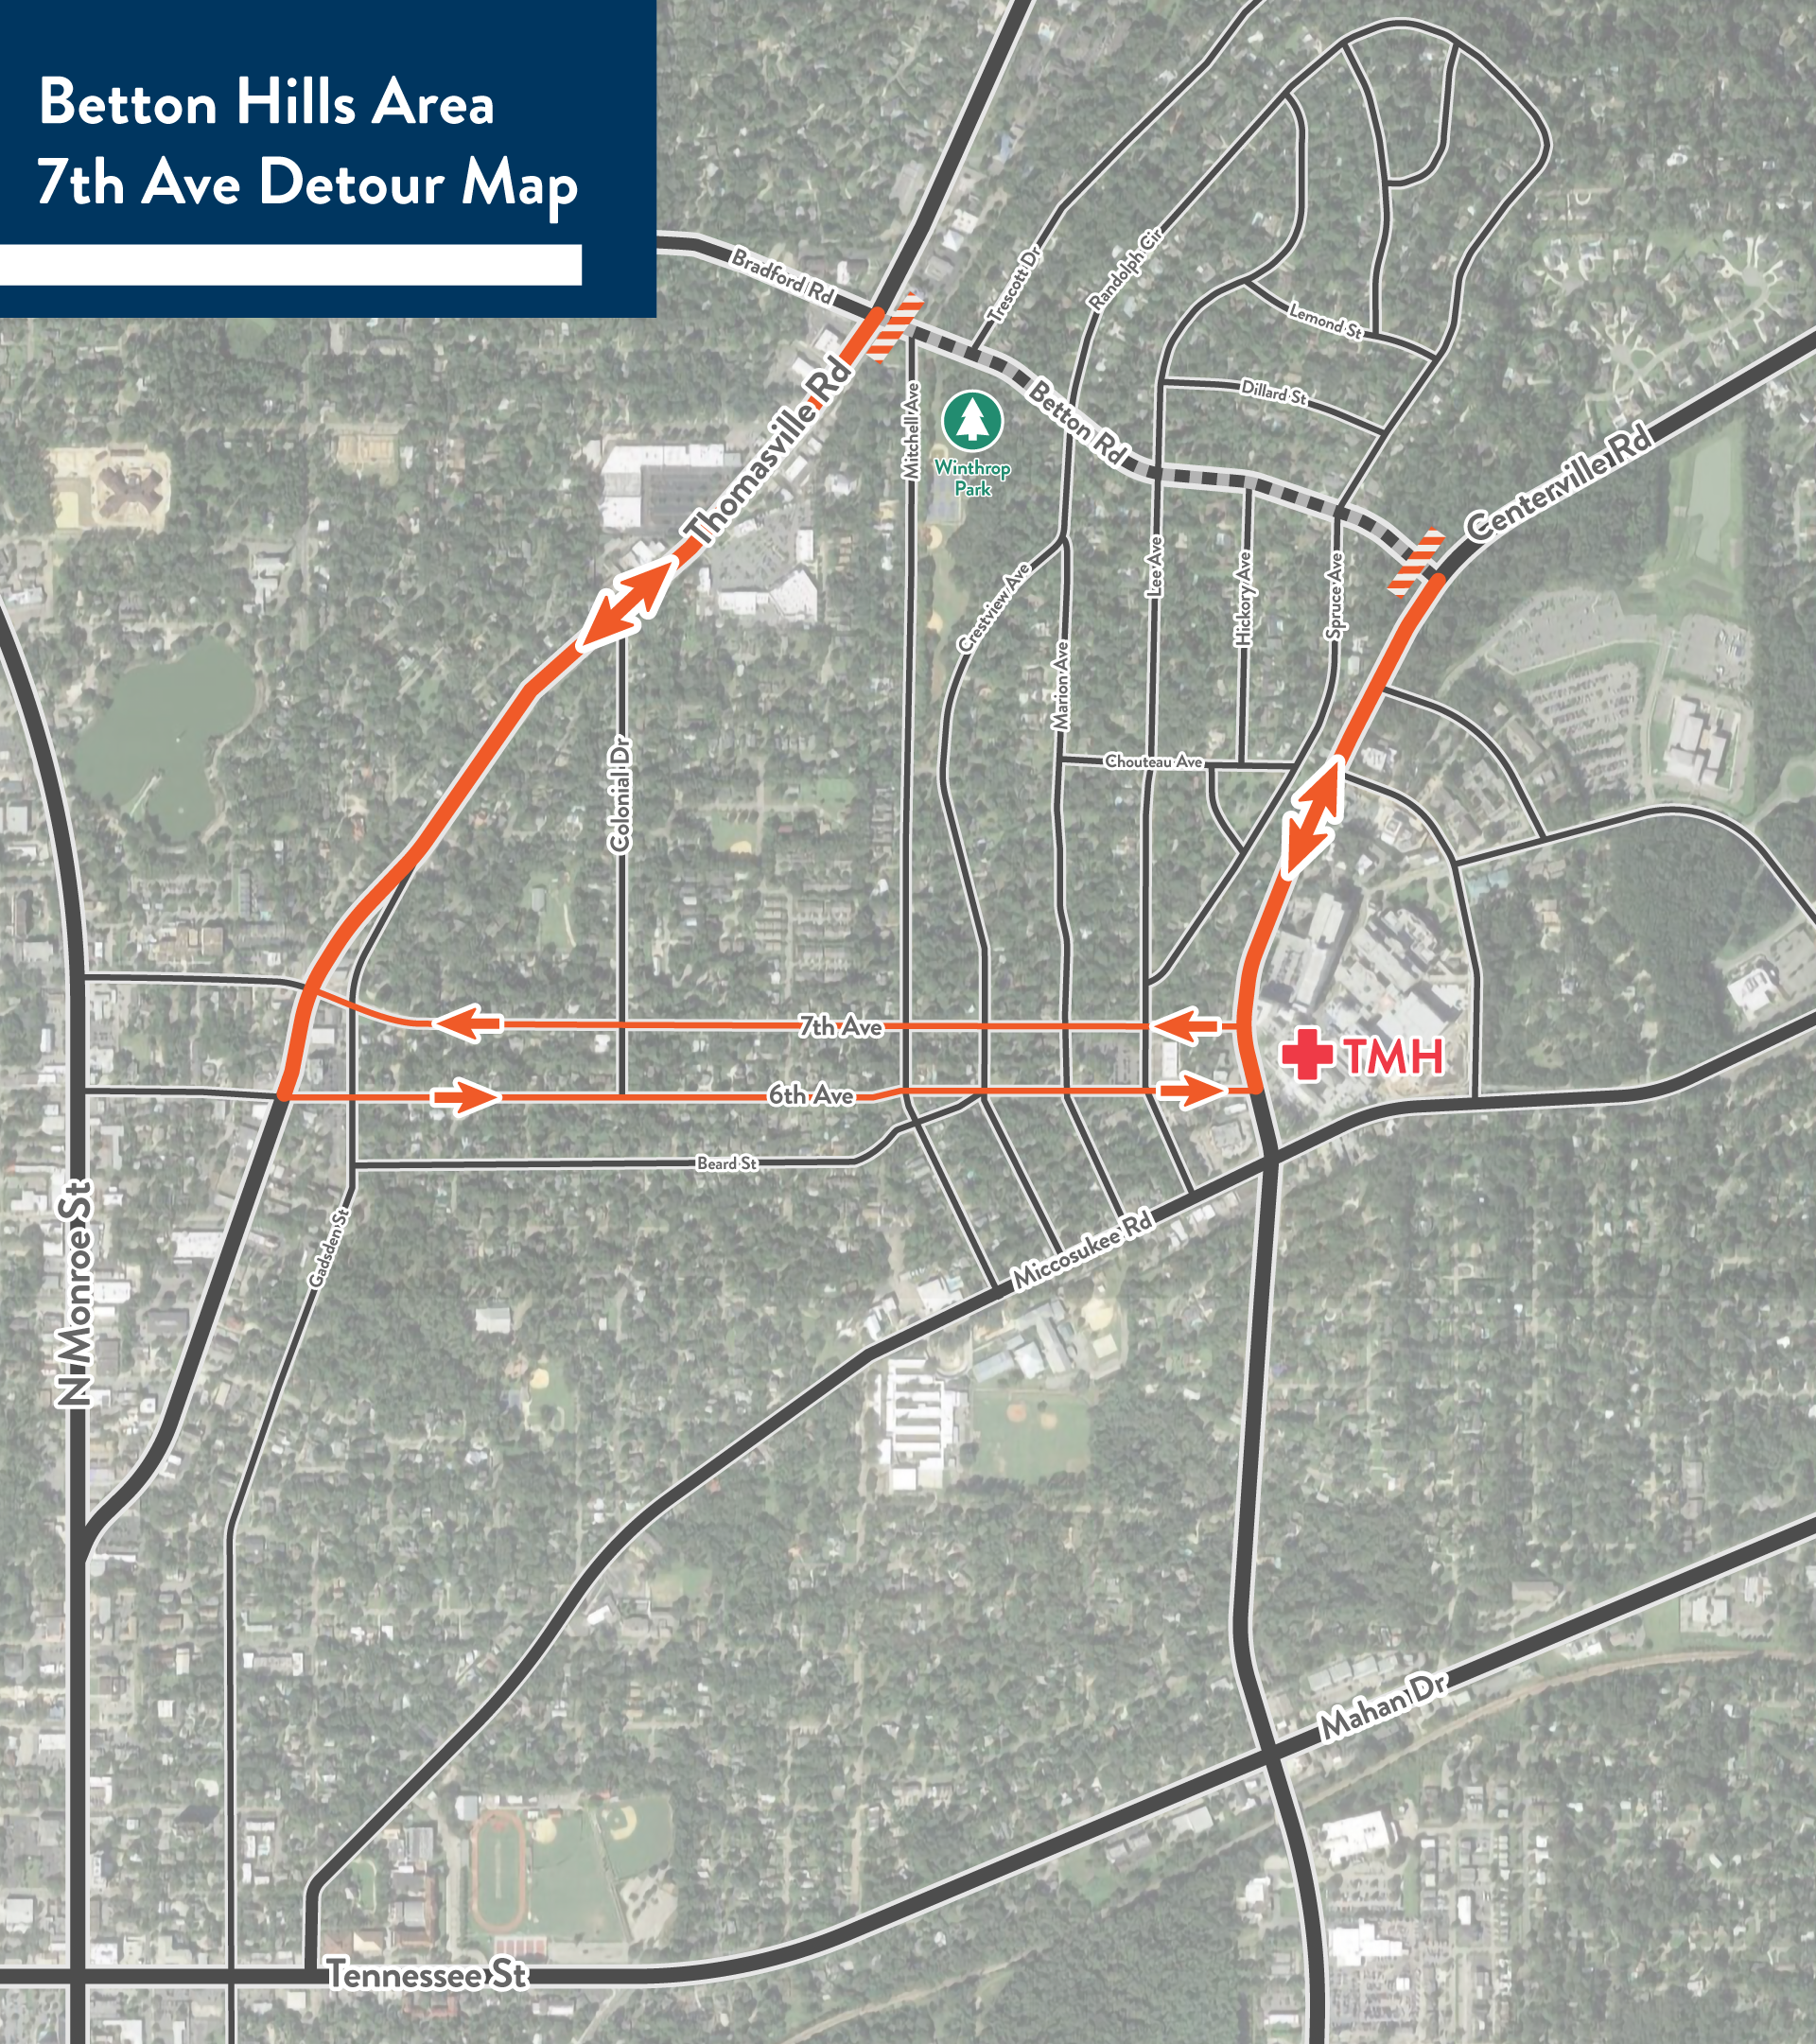 Detour map for the project area